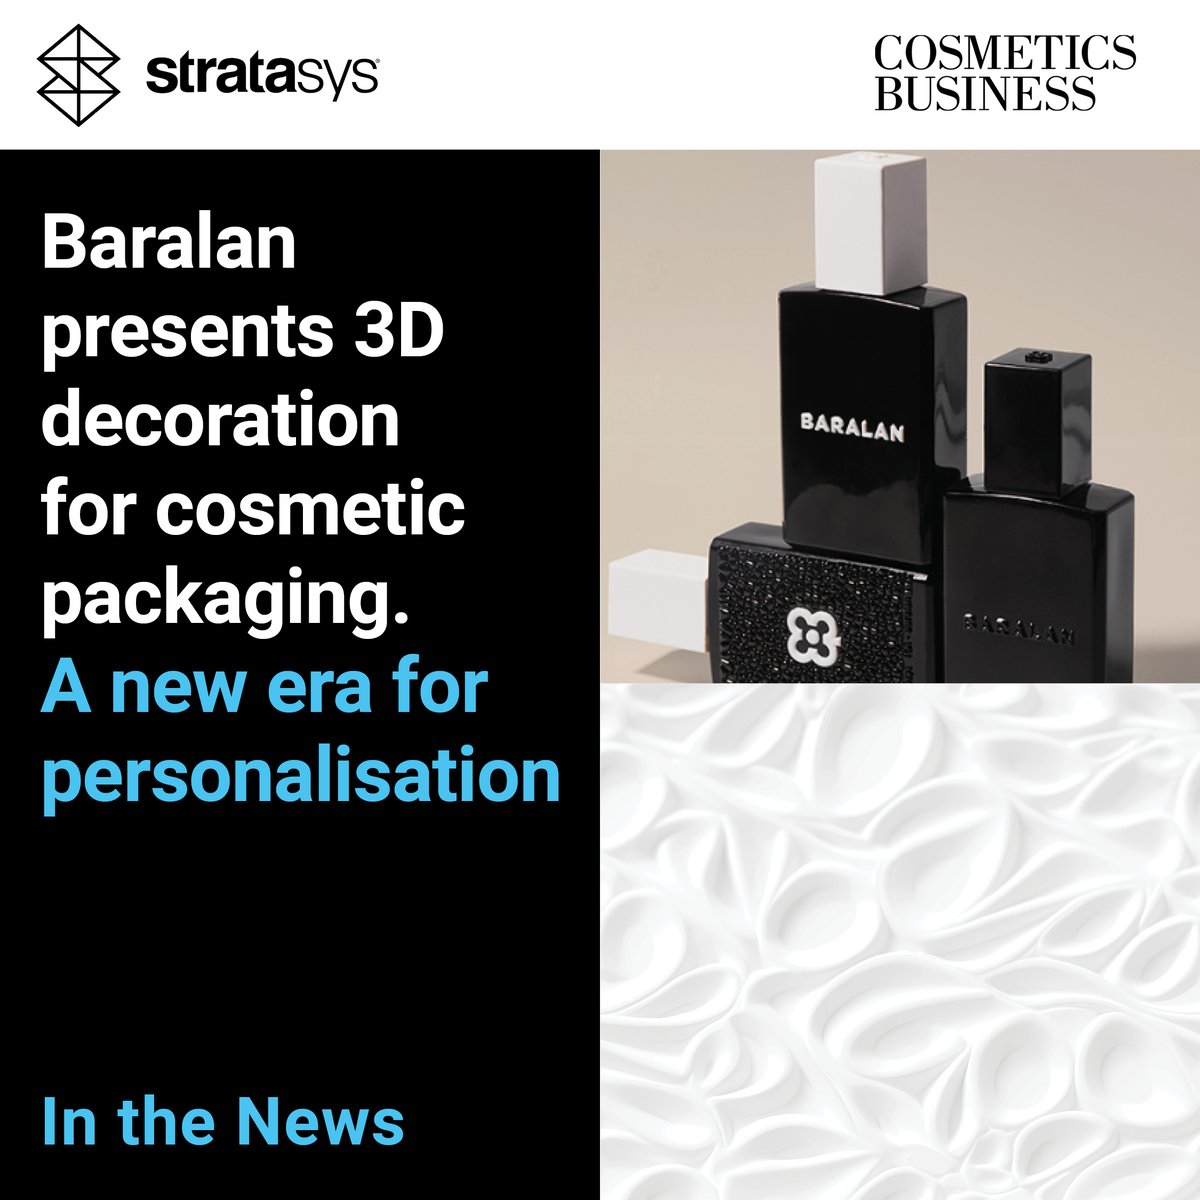 Proud of this collaboration with Baralan that brings together the innovative character of the companies involved.

Read here how 3D printing offers great potential to the world of cosmetic packaging >> okt.to/lyceGf

#MakeAdditiveWorkForYou #addstratasys